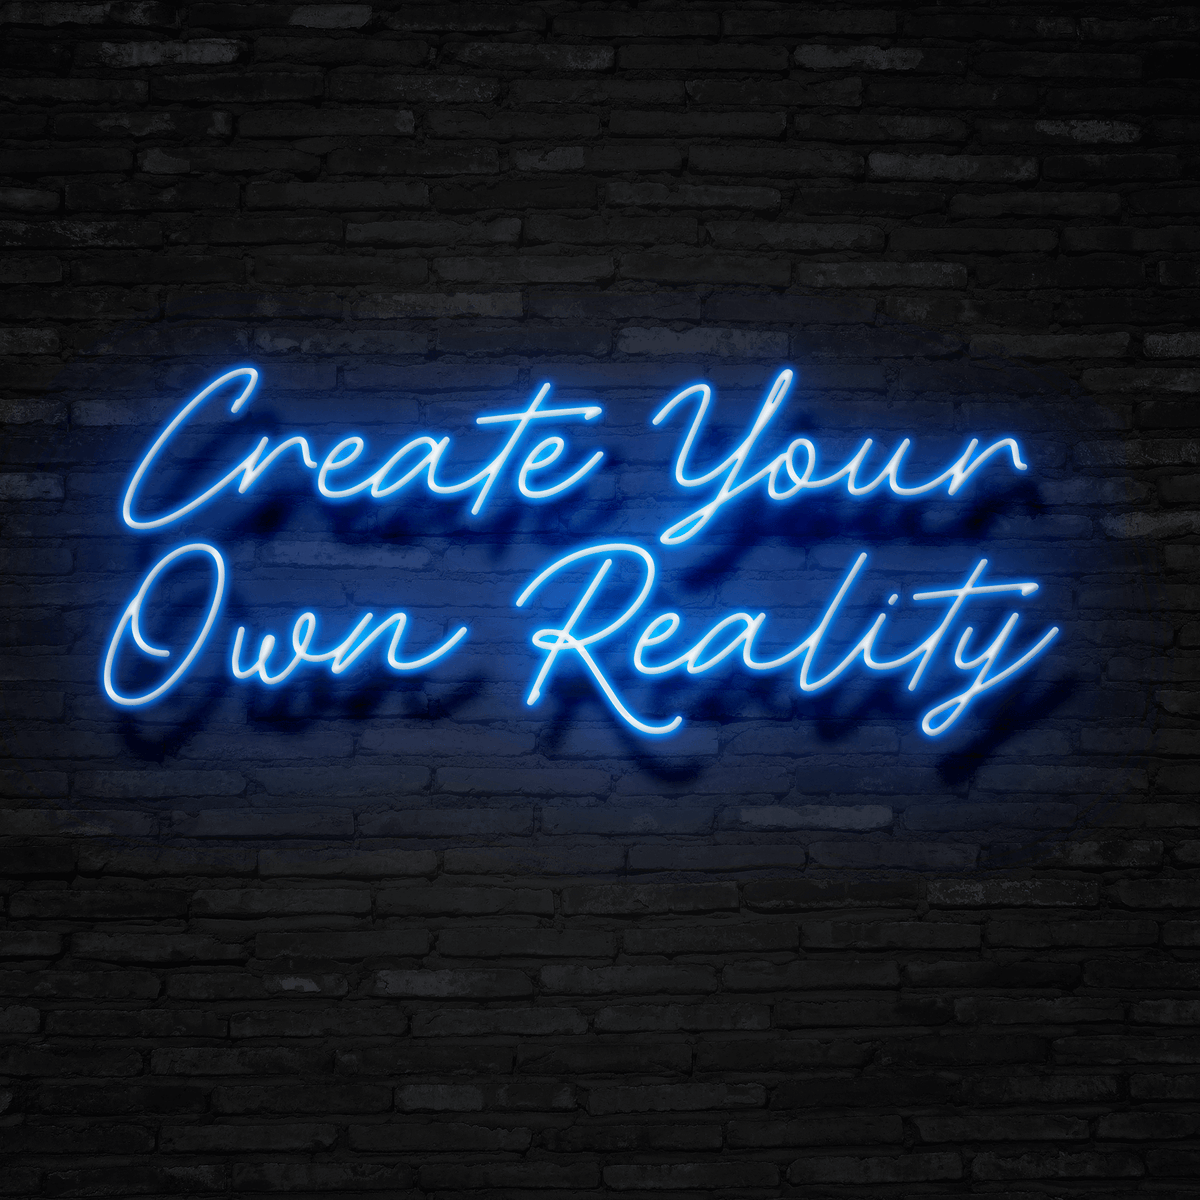 Create Your Own Reality - Neon Sign